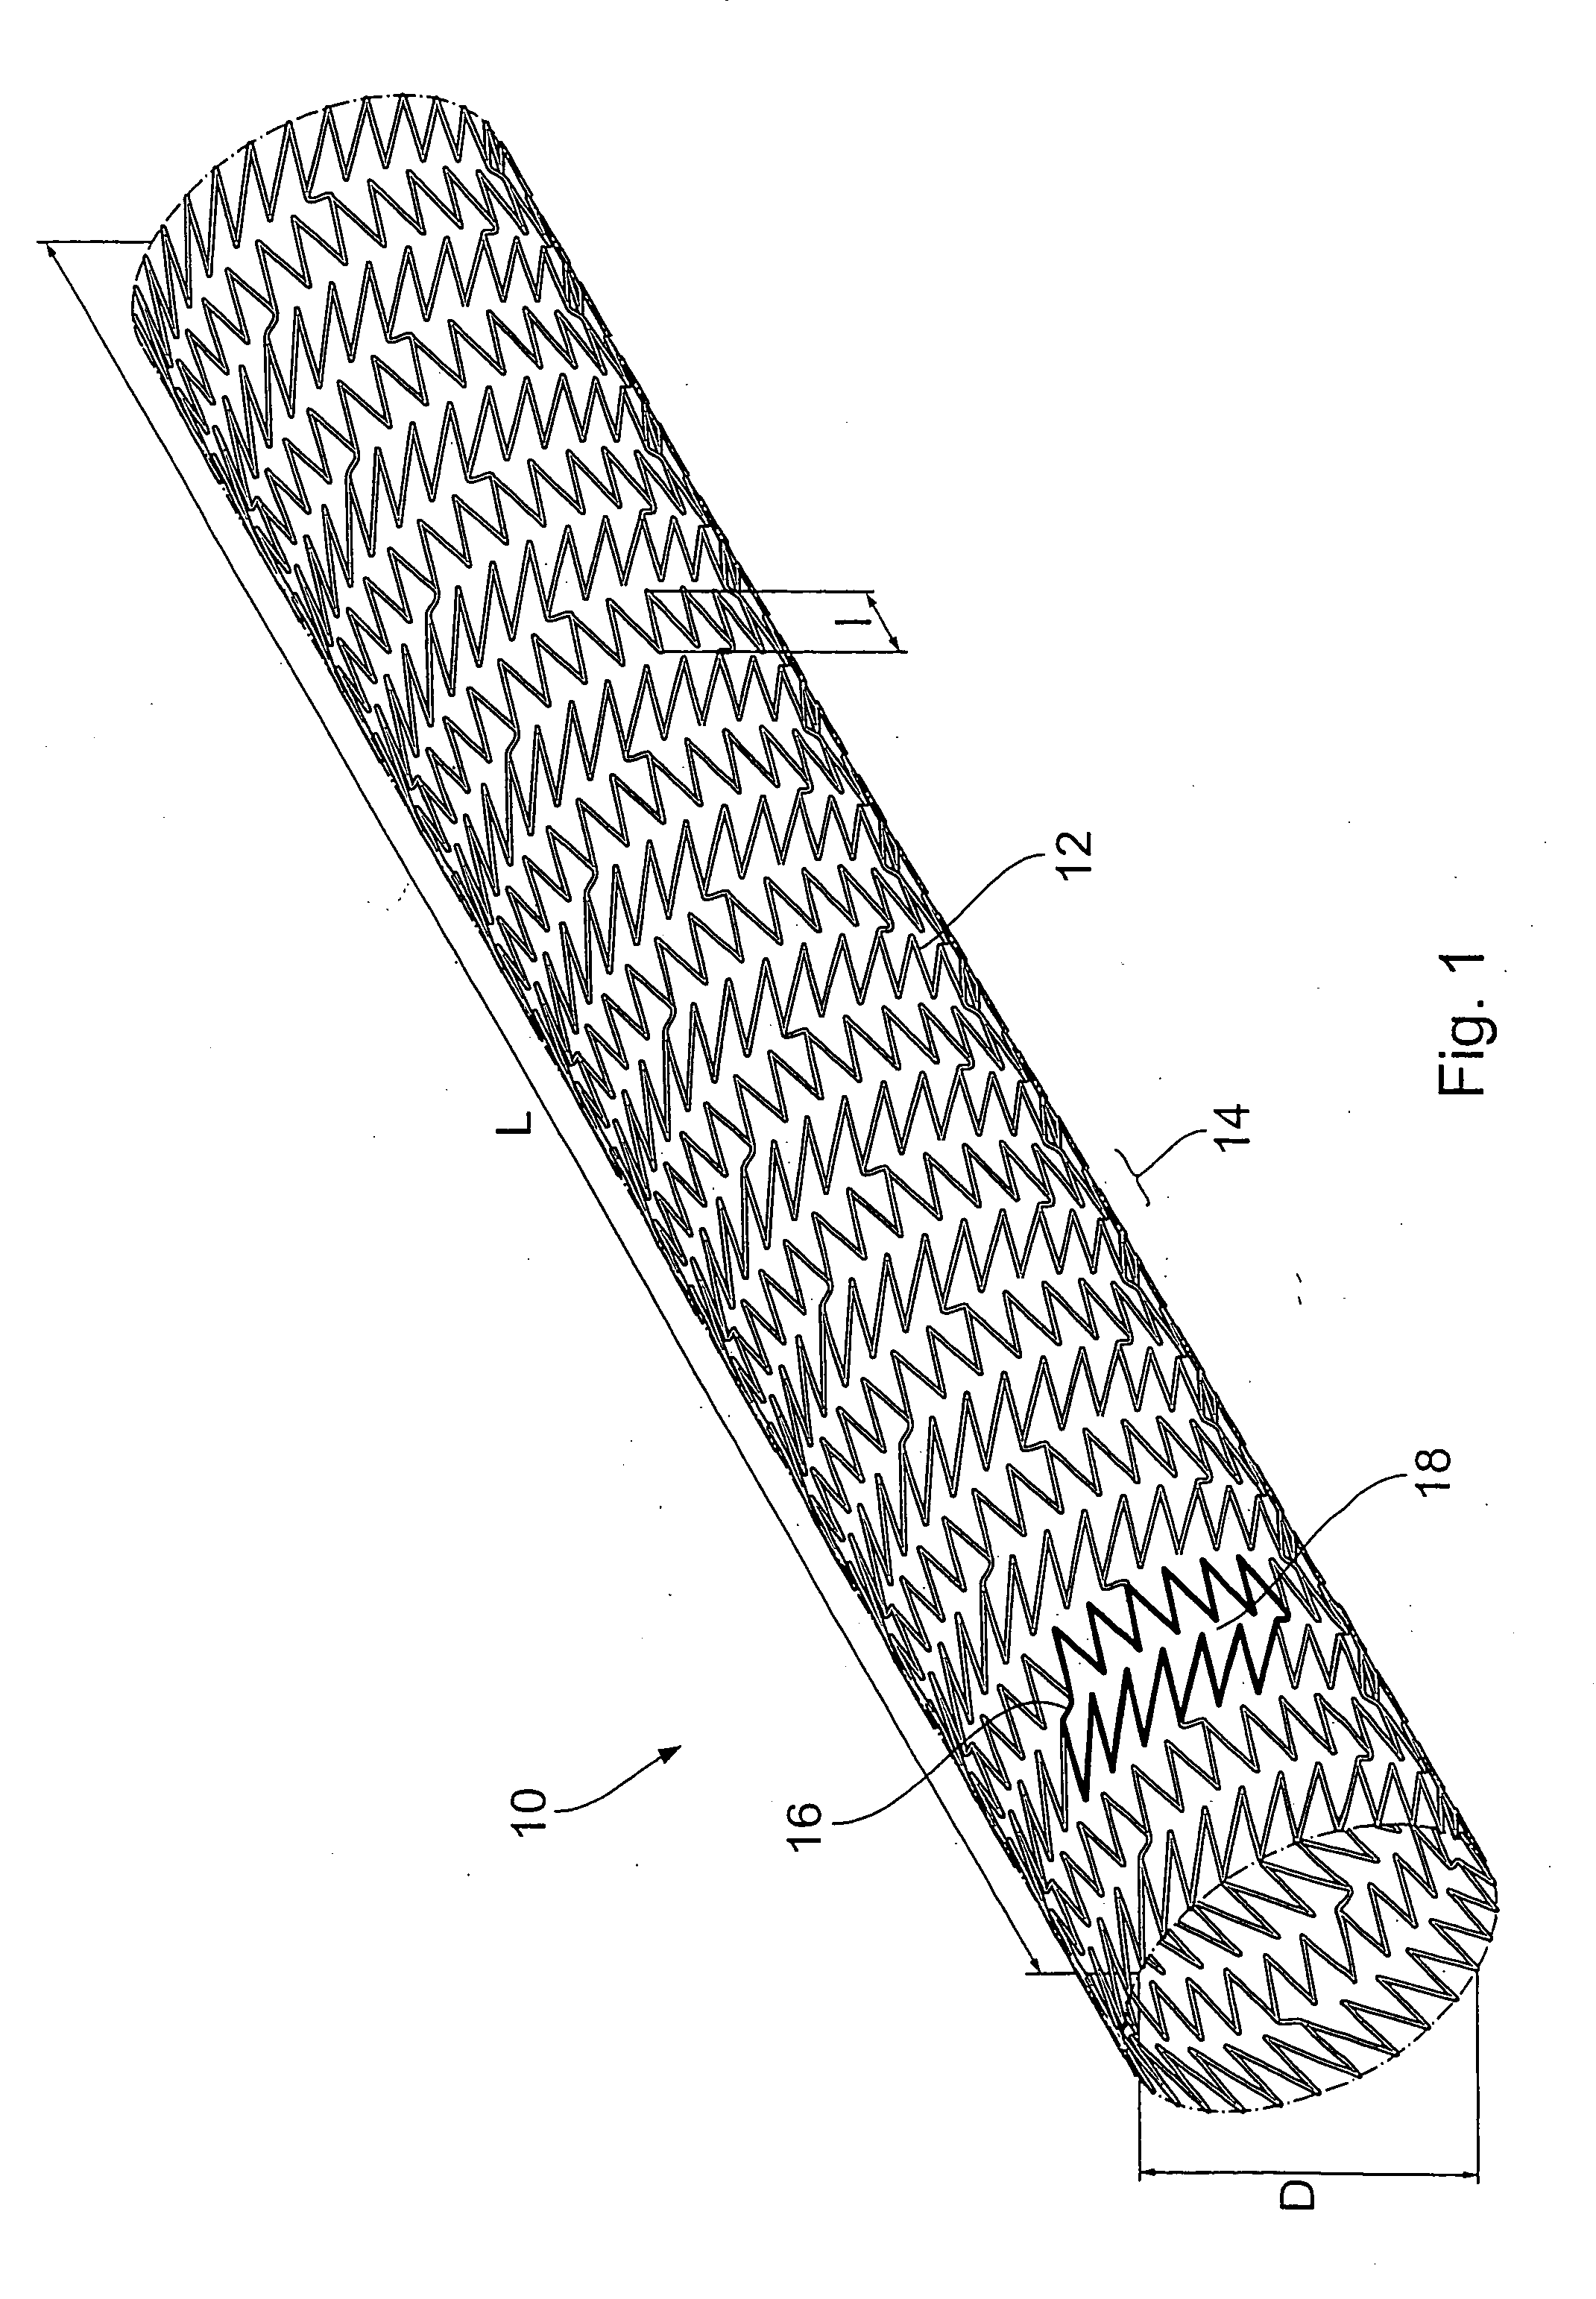 Endoprosthesis comprising a magnesium alloy